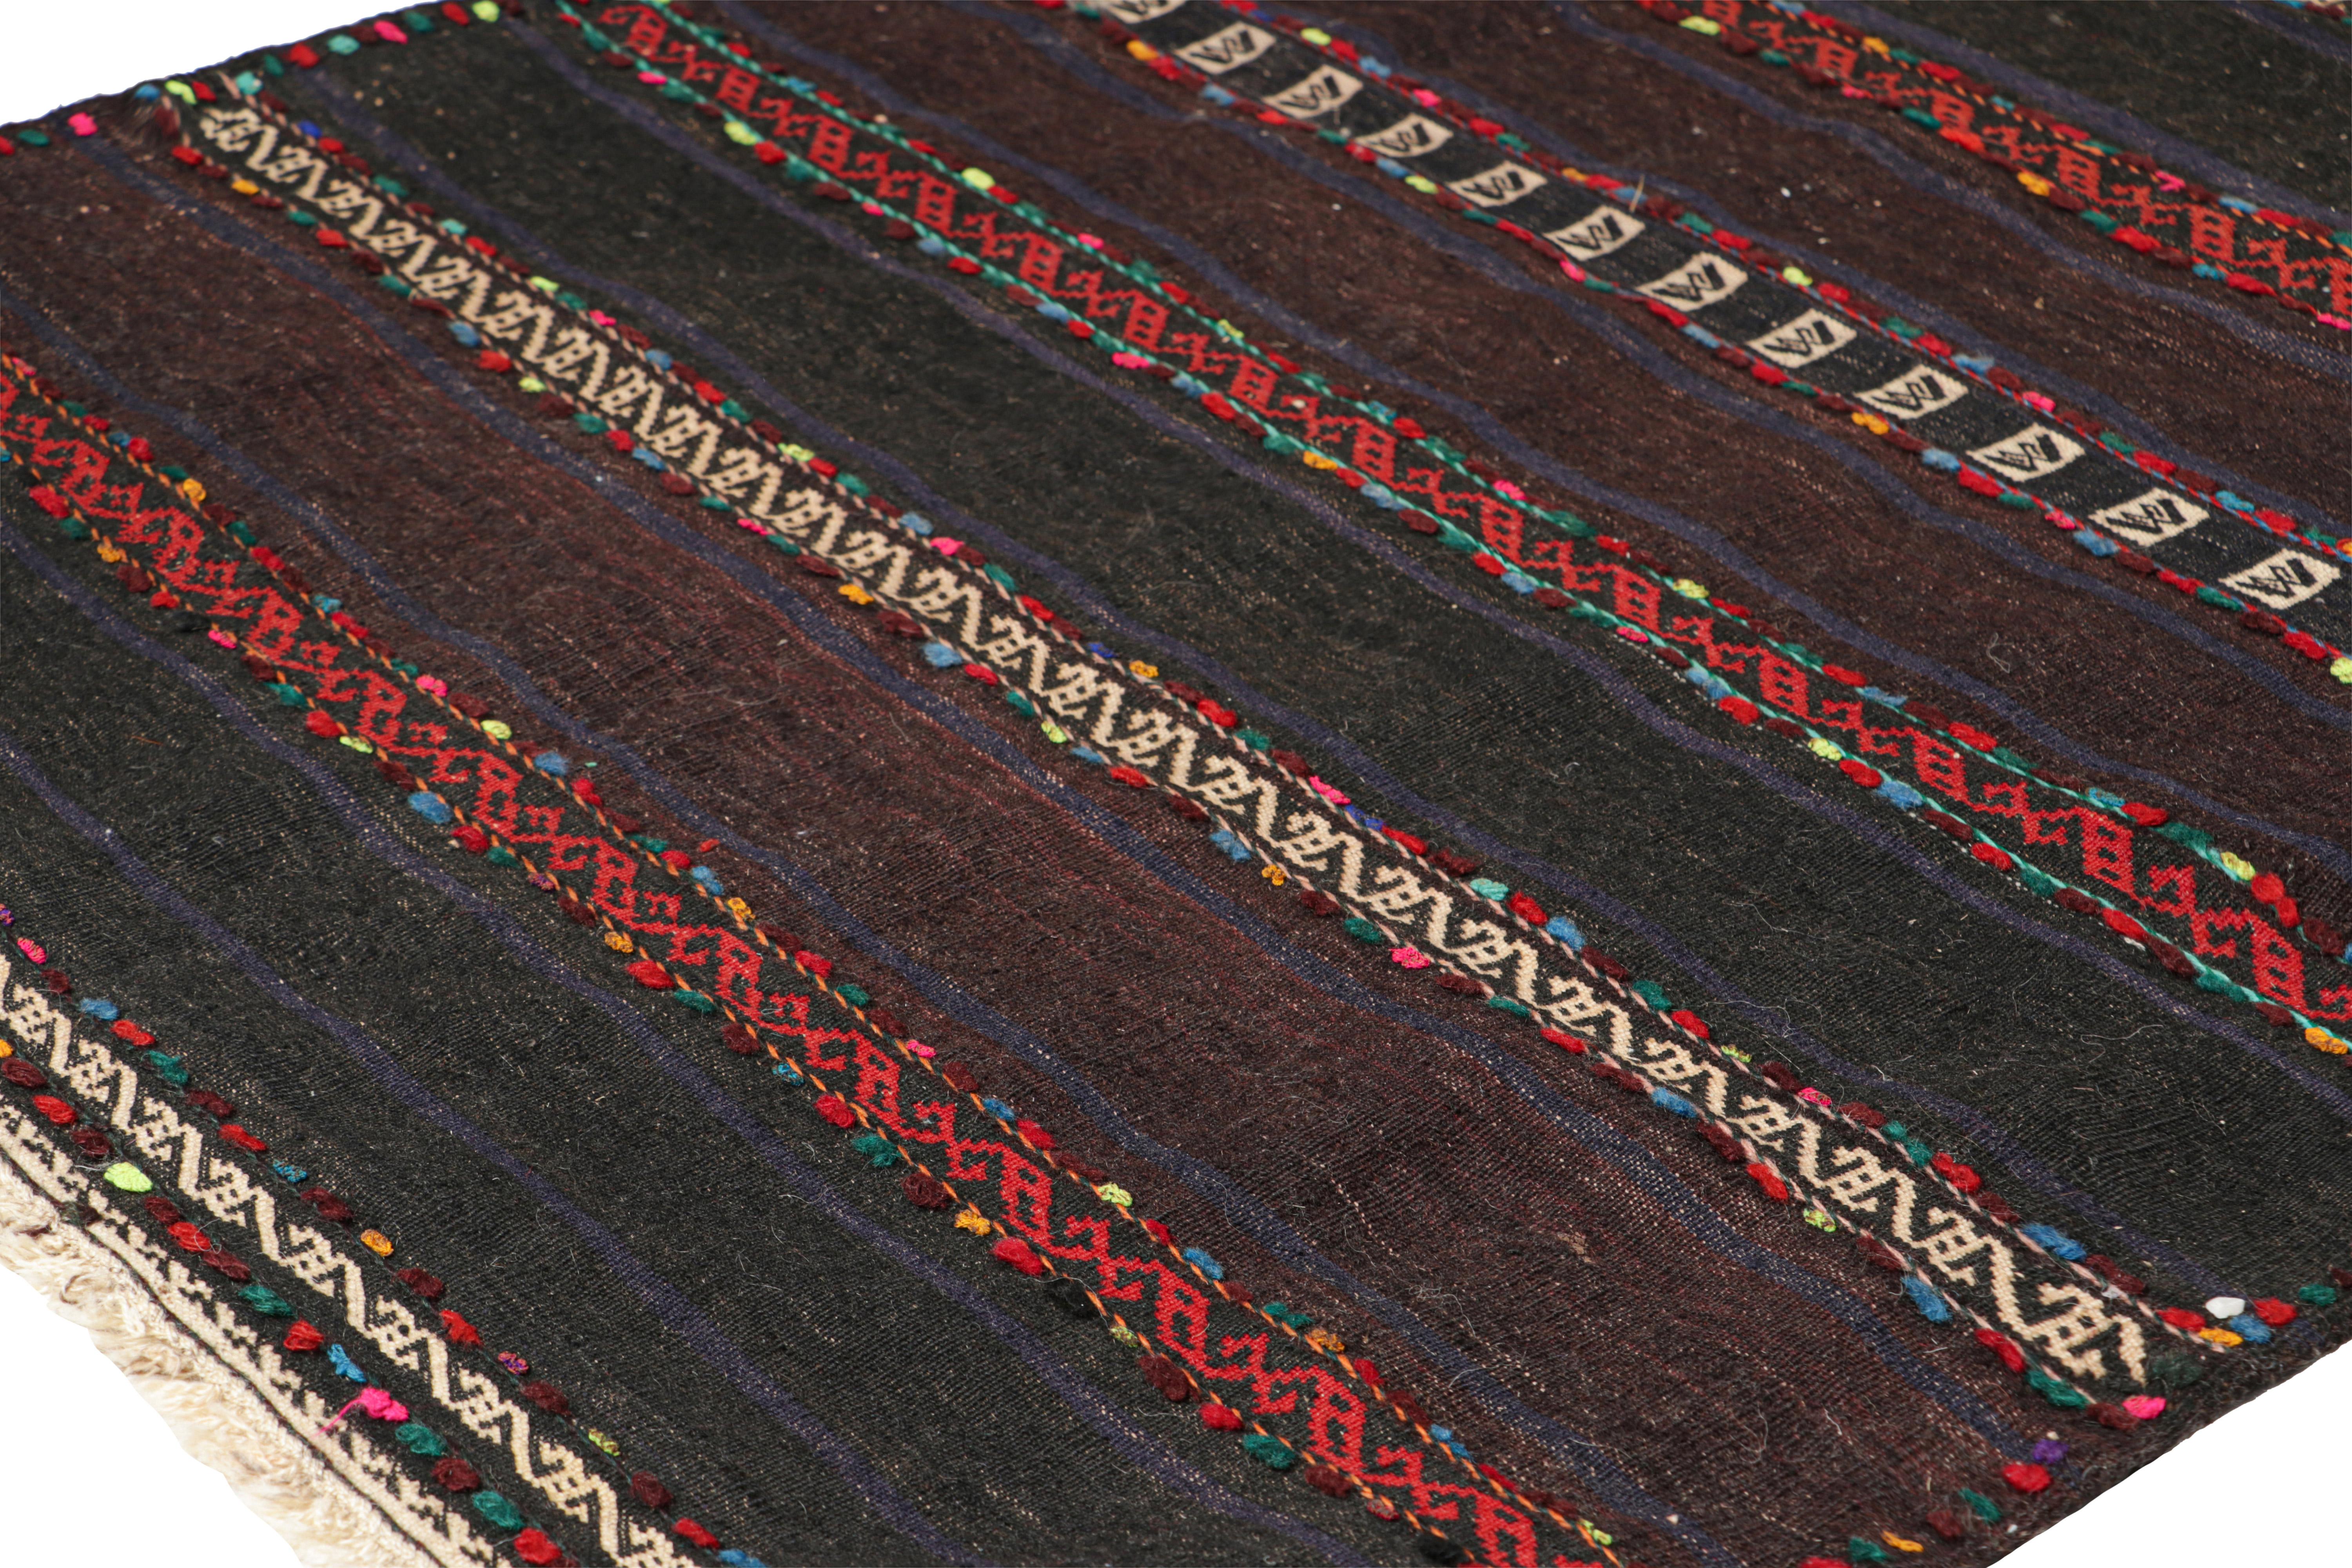 Hand-Woven Vintage Afghan Kilim with Stripes and Geometric Patterns, from Rug & Kilim For Sale